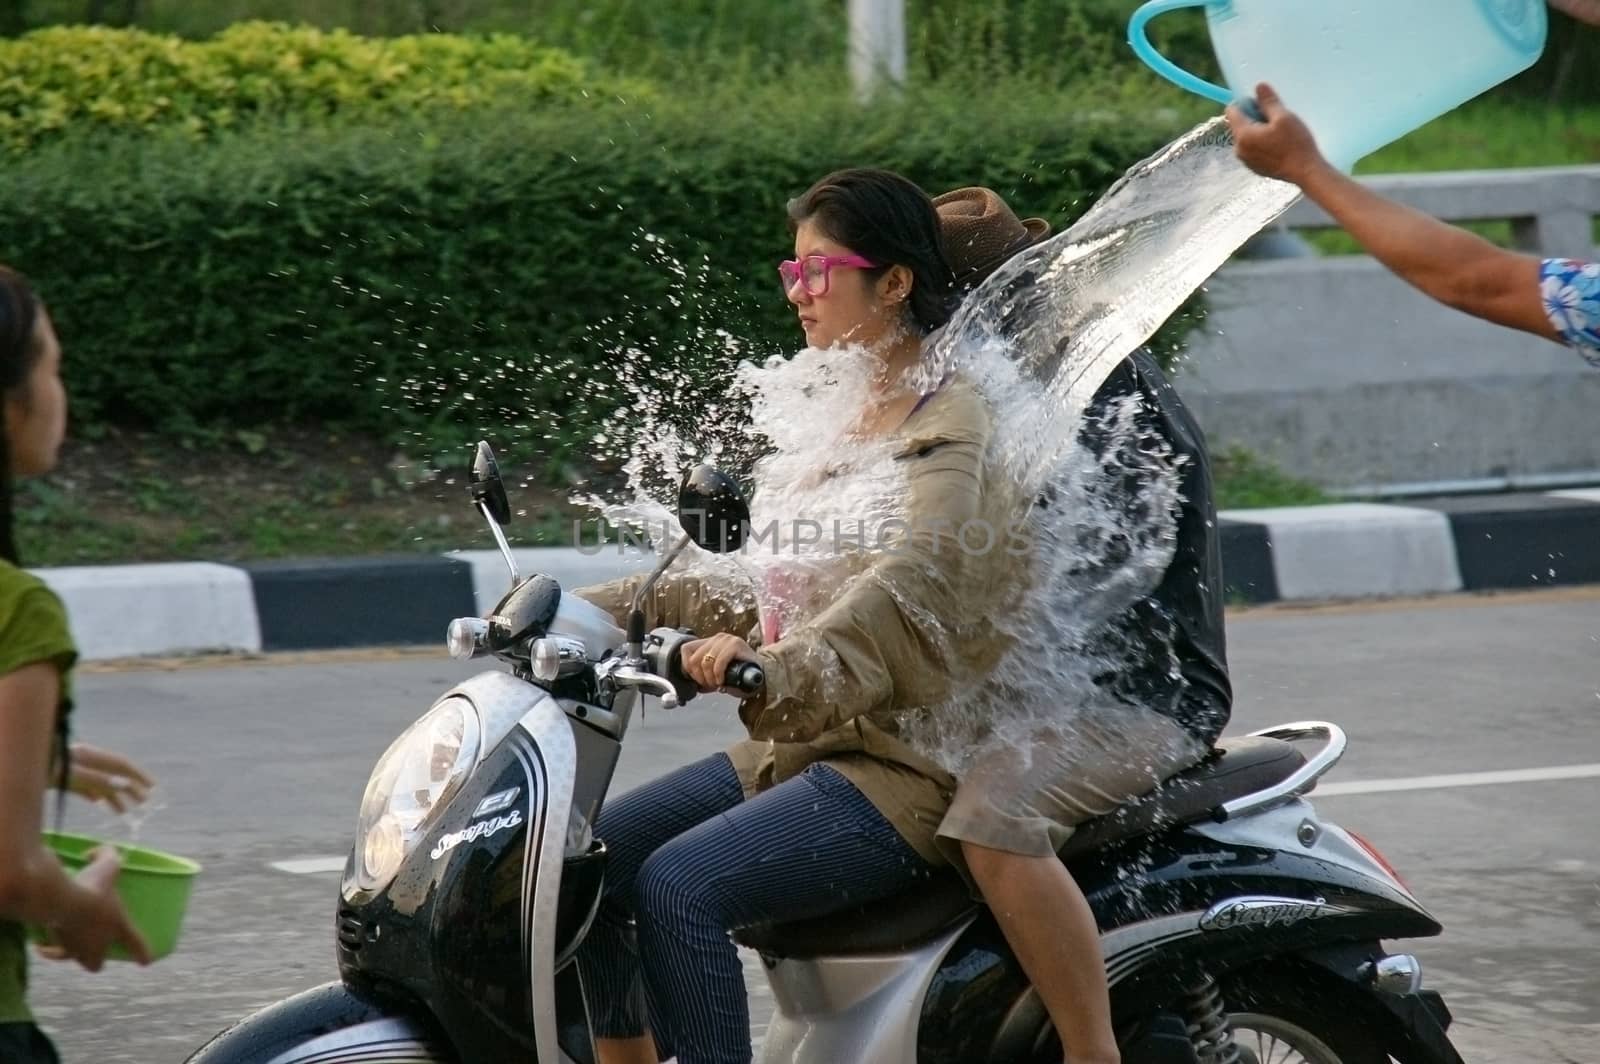 CHIANGMAI,THAILAND-APRIL 14, 2011:Unidentified tourist with motorcycle in a water fight festival or Songkran Festival (Thai New Year), on April 14, 2011 in Chiangmai, Thailand.